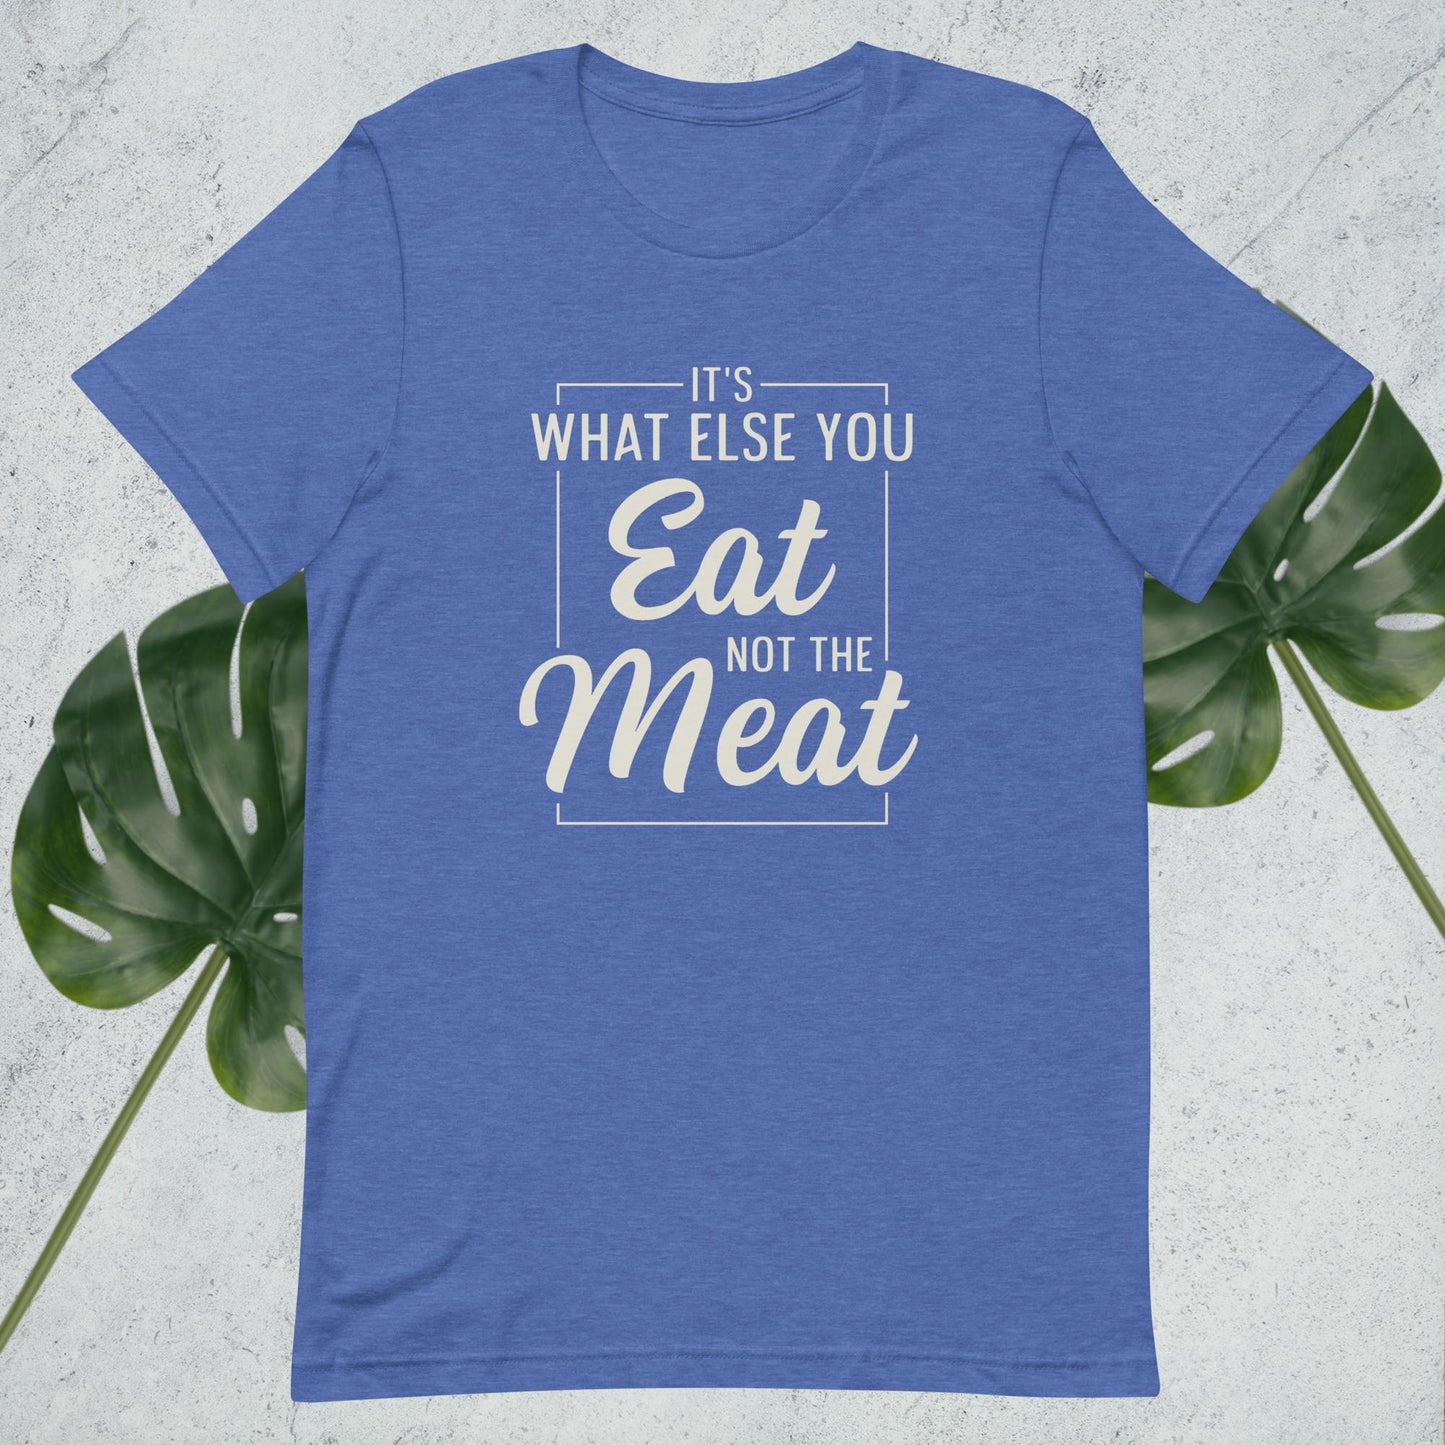 Not the Meat Shirt